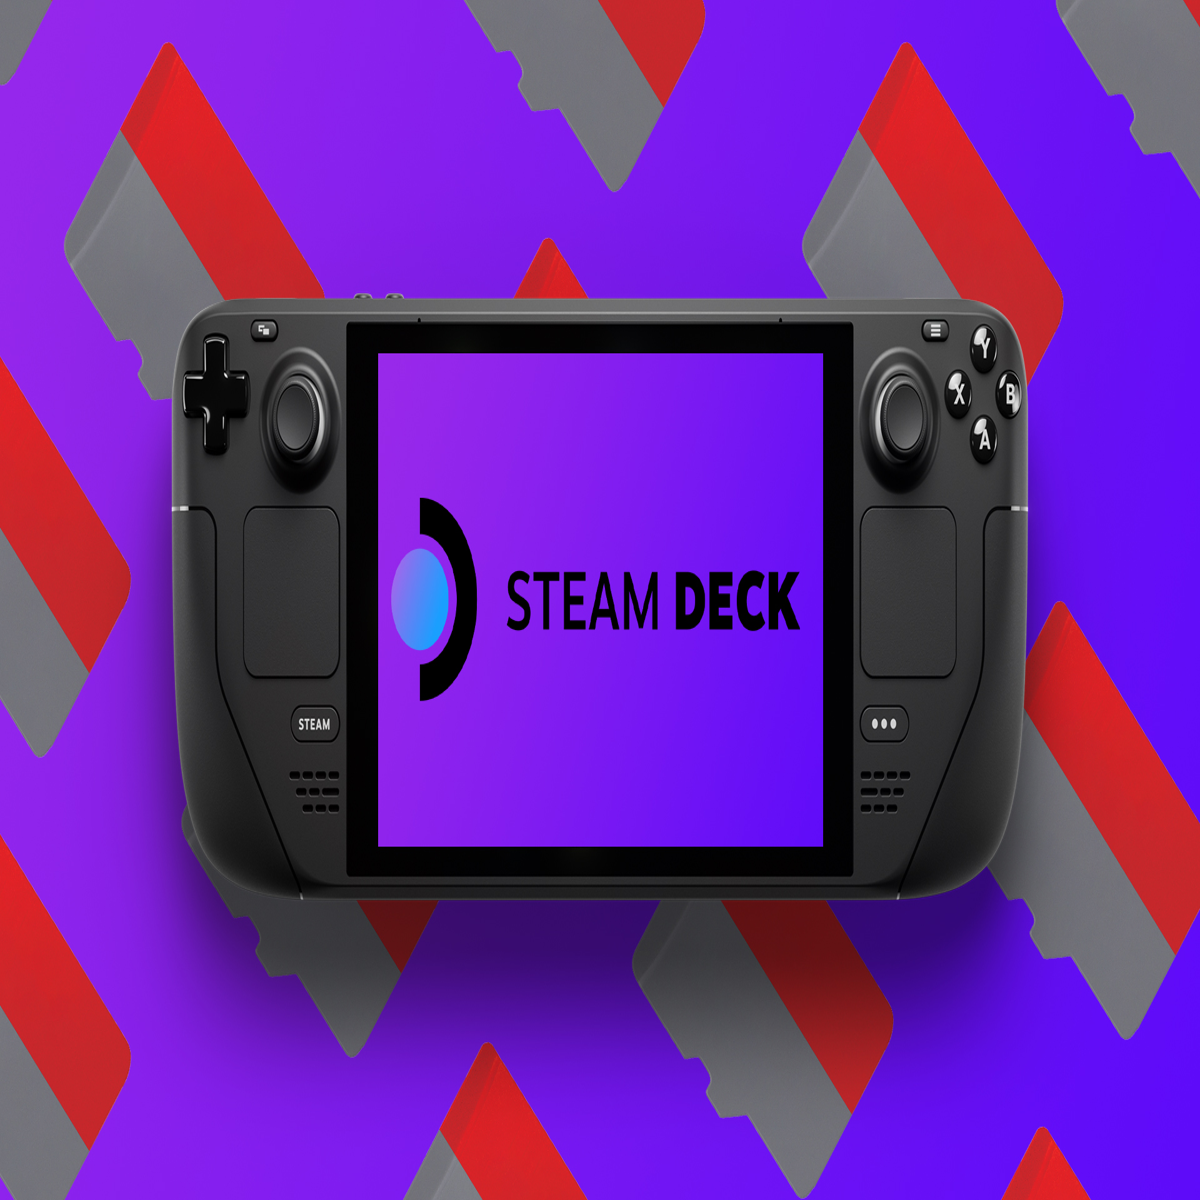 More major multiplayer games moving to Steam Deck